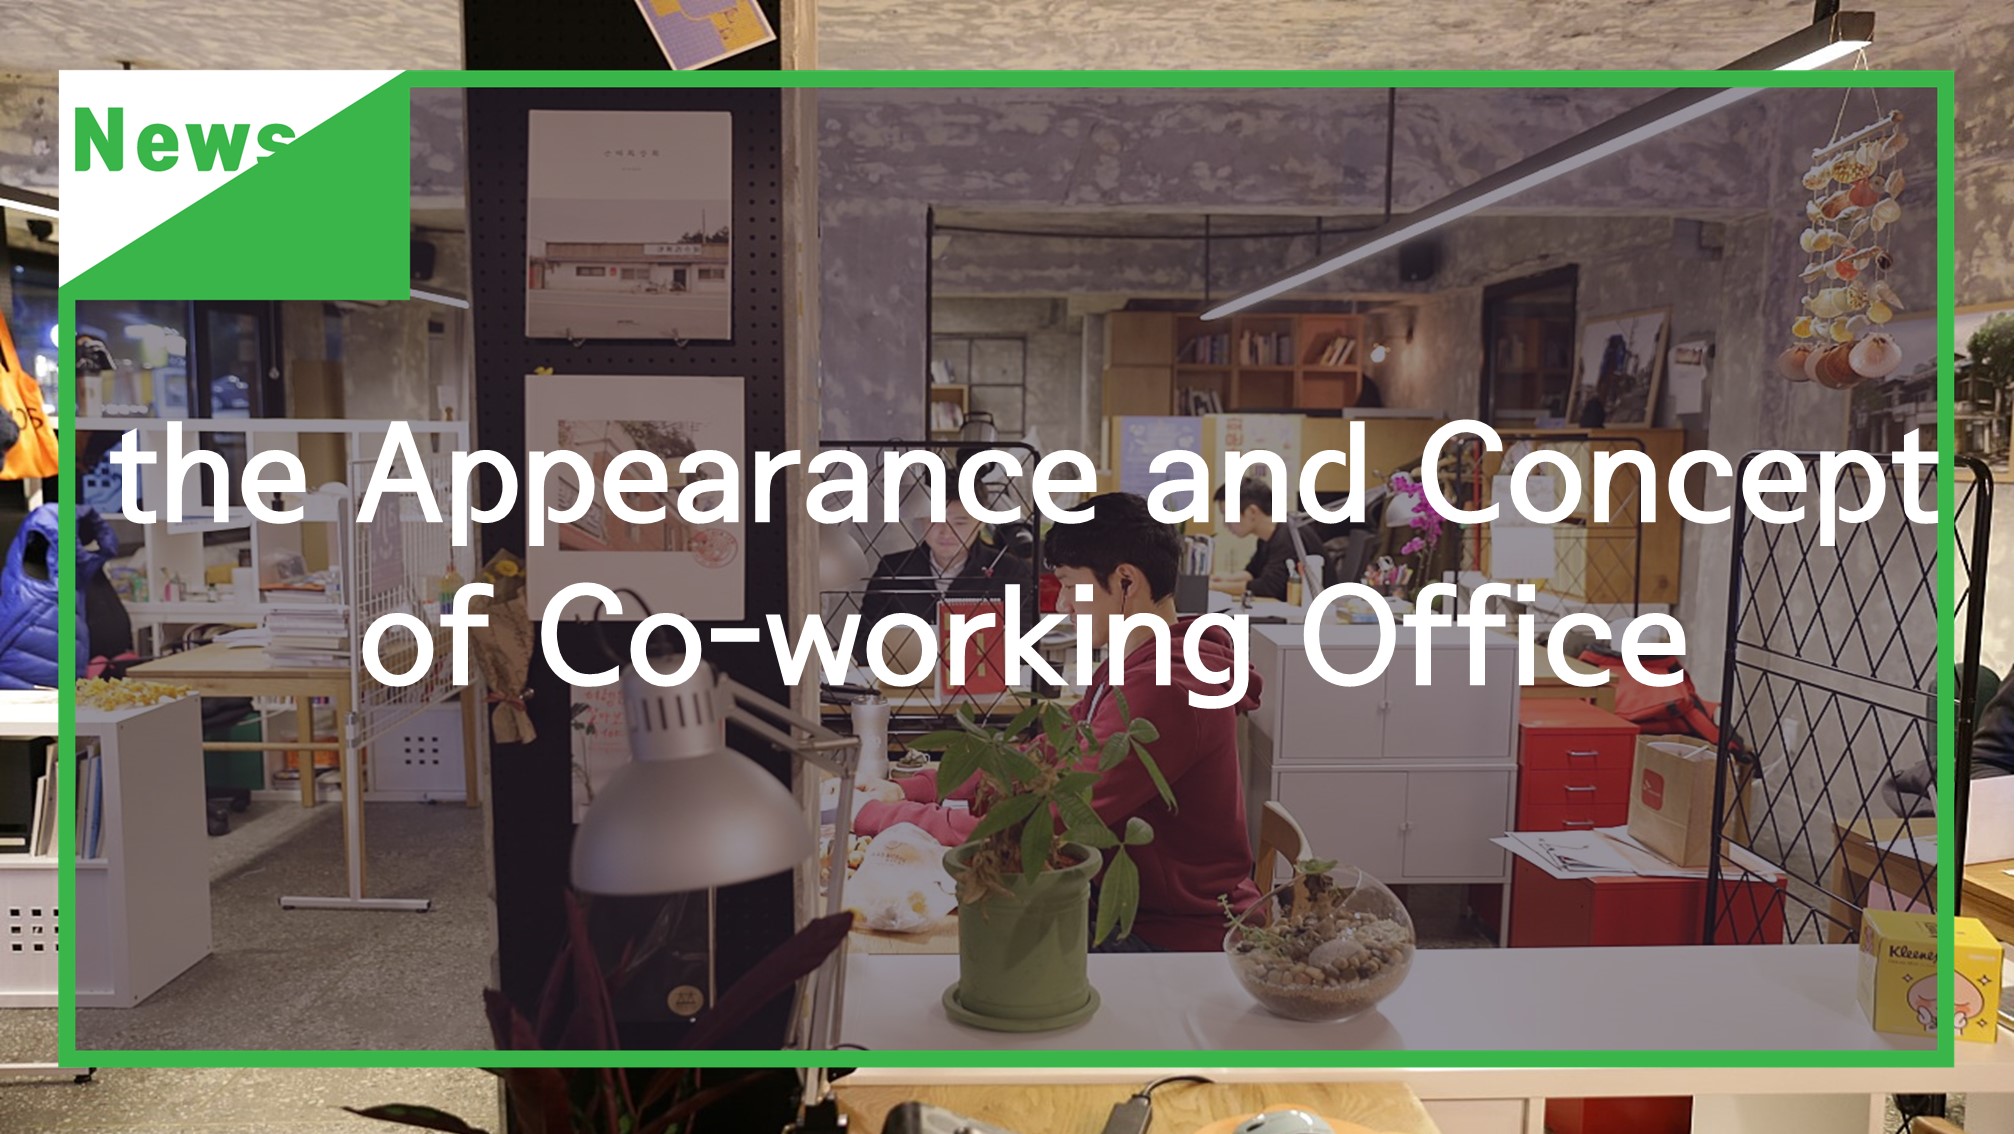 [Resources] the Appearance and Concept of Co-working Office